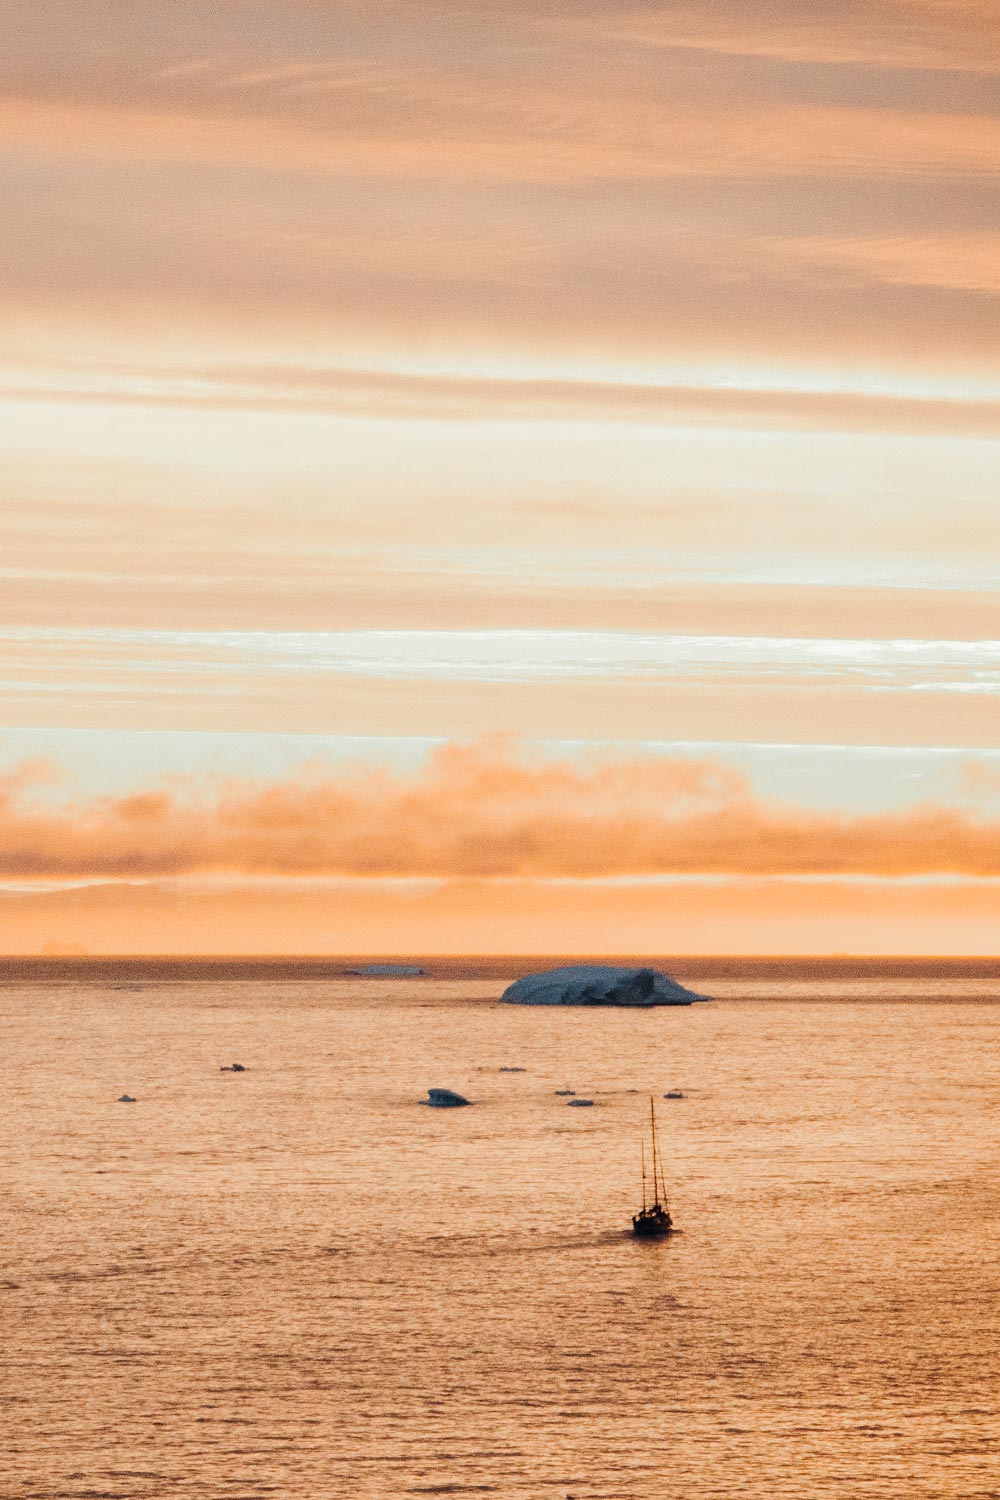 Sunset hues cast a warm glow on the icebergs during a midnight sun cruise